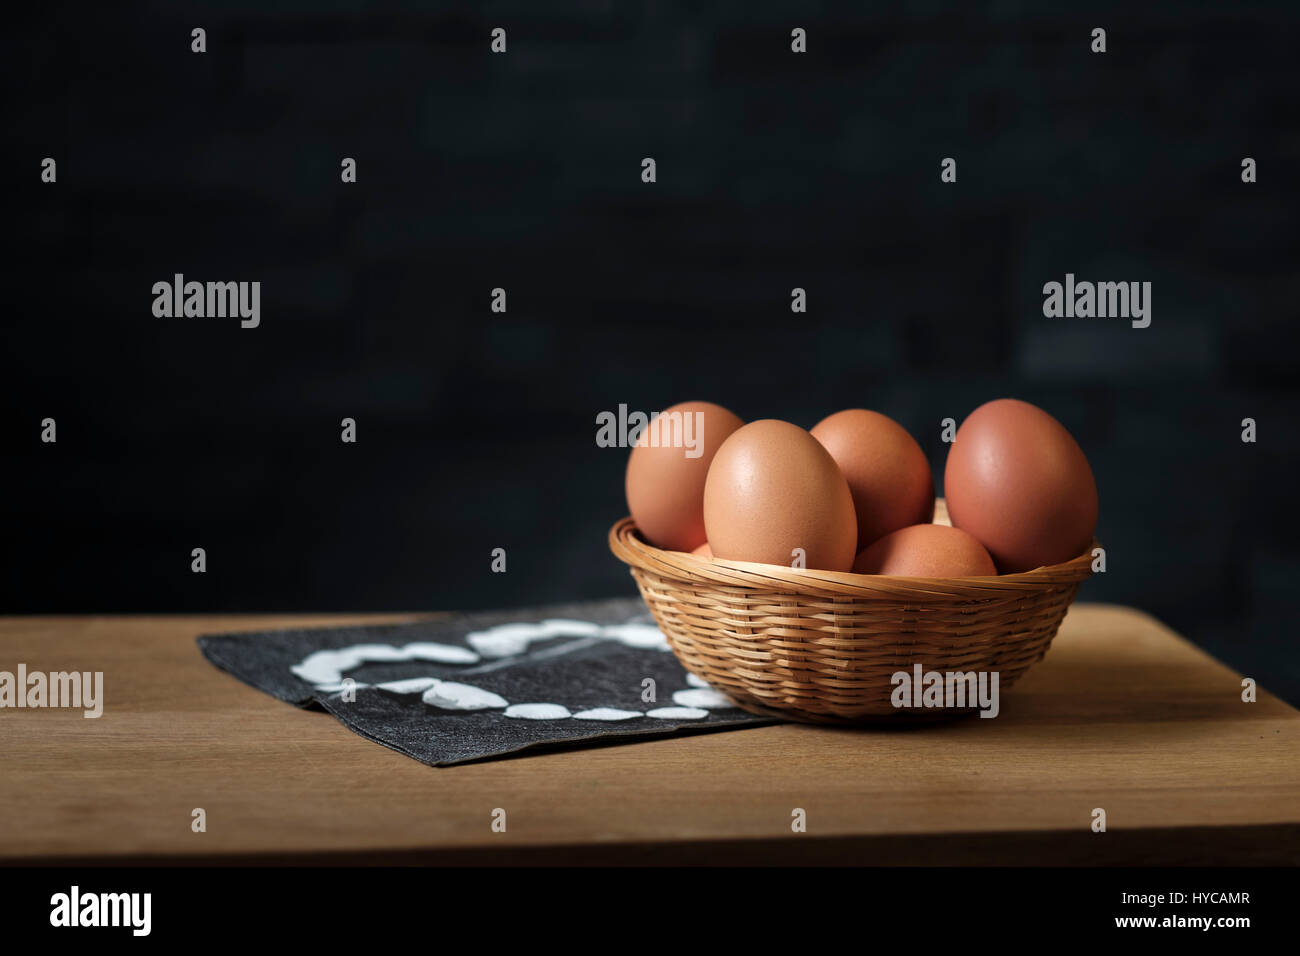 brown eggs in a wicker basket on a wooden board set against a black background Stock Photo